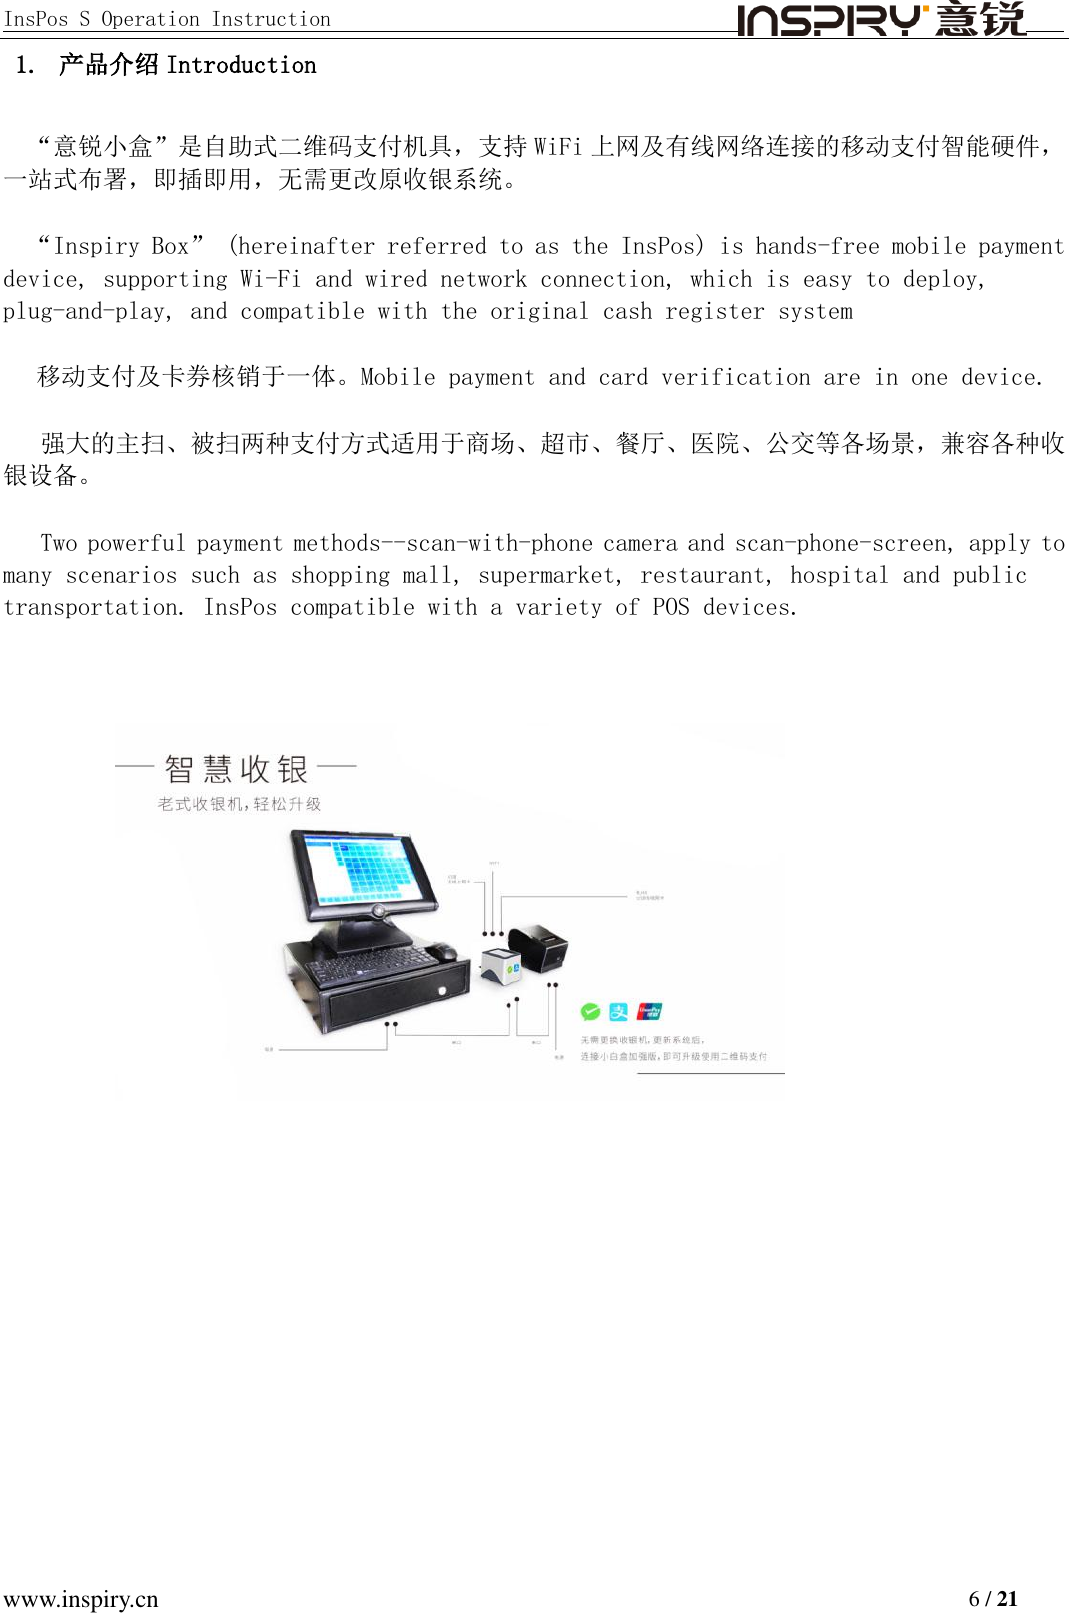 InsPos S Operation Instruction                                         www.inspiry.cn                                                                           6 / 21 1. 产品介绍 Introduction “意锐小盒”是自助式二维码支付机具，支持 WiFi 上网及有线网络连接的移动支付智能硬件，一站式布署，即插即用，无需更改原收银系统。 “Inspiry Box” (hereinafter referred to as the InsPos) is hands-free mobile payment device, supporting Wi-Fi and wired network connection, which is easy to deploy, plug-and-play, and compatible with the original cash register system 移动支付及卡券核销于一体。Mobile payment and card verification are in one device. 强大的主扫、被扫两种支付方式适用于商场、超市、餐厅、医院、公交等各场景，兼容各种收银设备。 Two powerful payment methods--scan-with-phone camera and scan-phone-screen, apply to many scenarios such as shopping mall, supermarket, restaurant, hospital and public transportation. InsPos compatible with a variety of POS devices.   